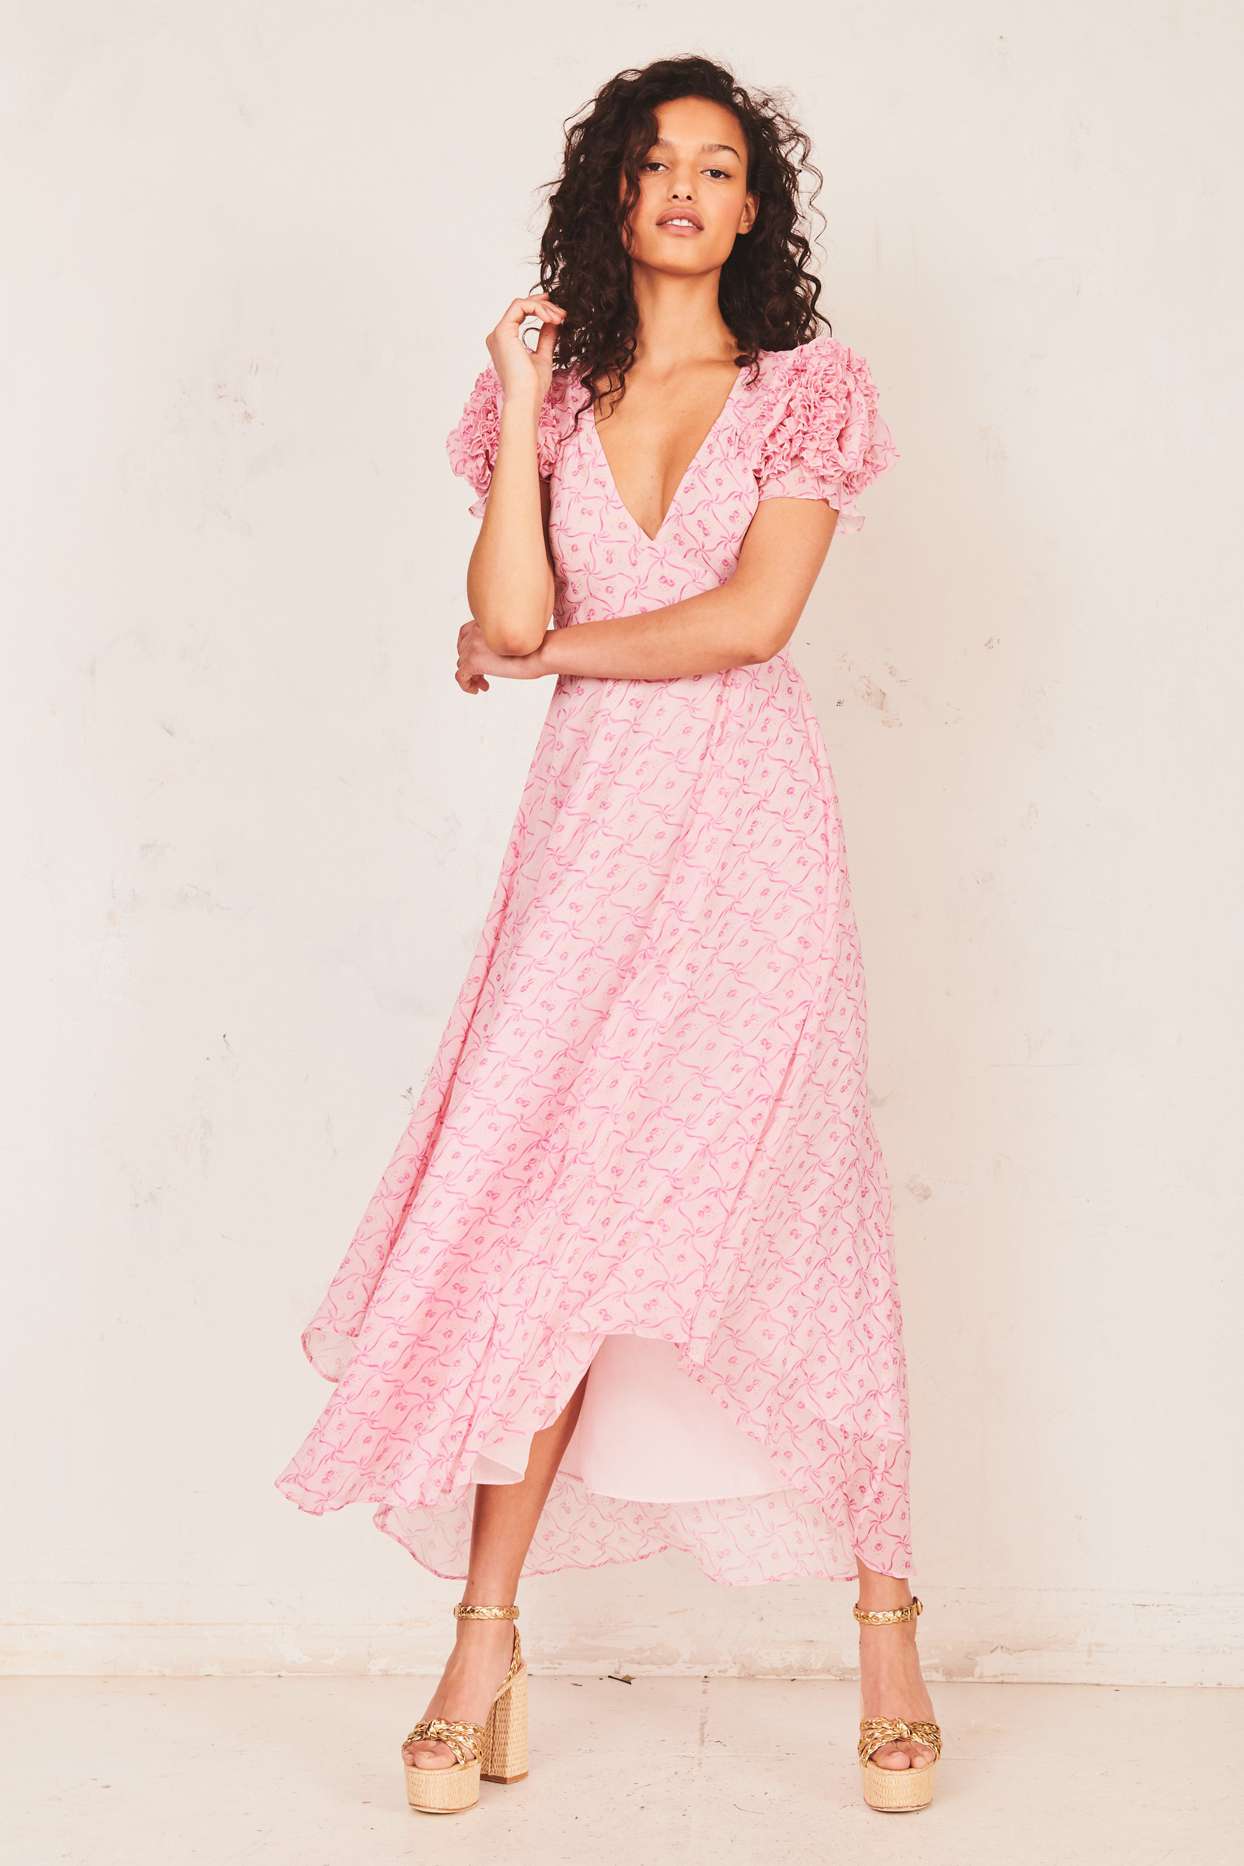 Be the Best Dressed Guest with Summer Formal Wedding Guest Attire from Bhldn Weddings!